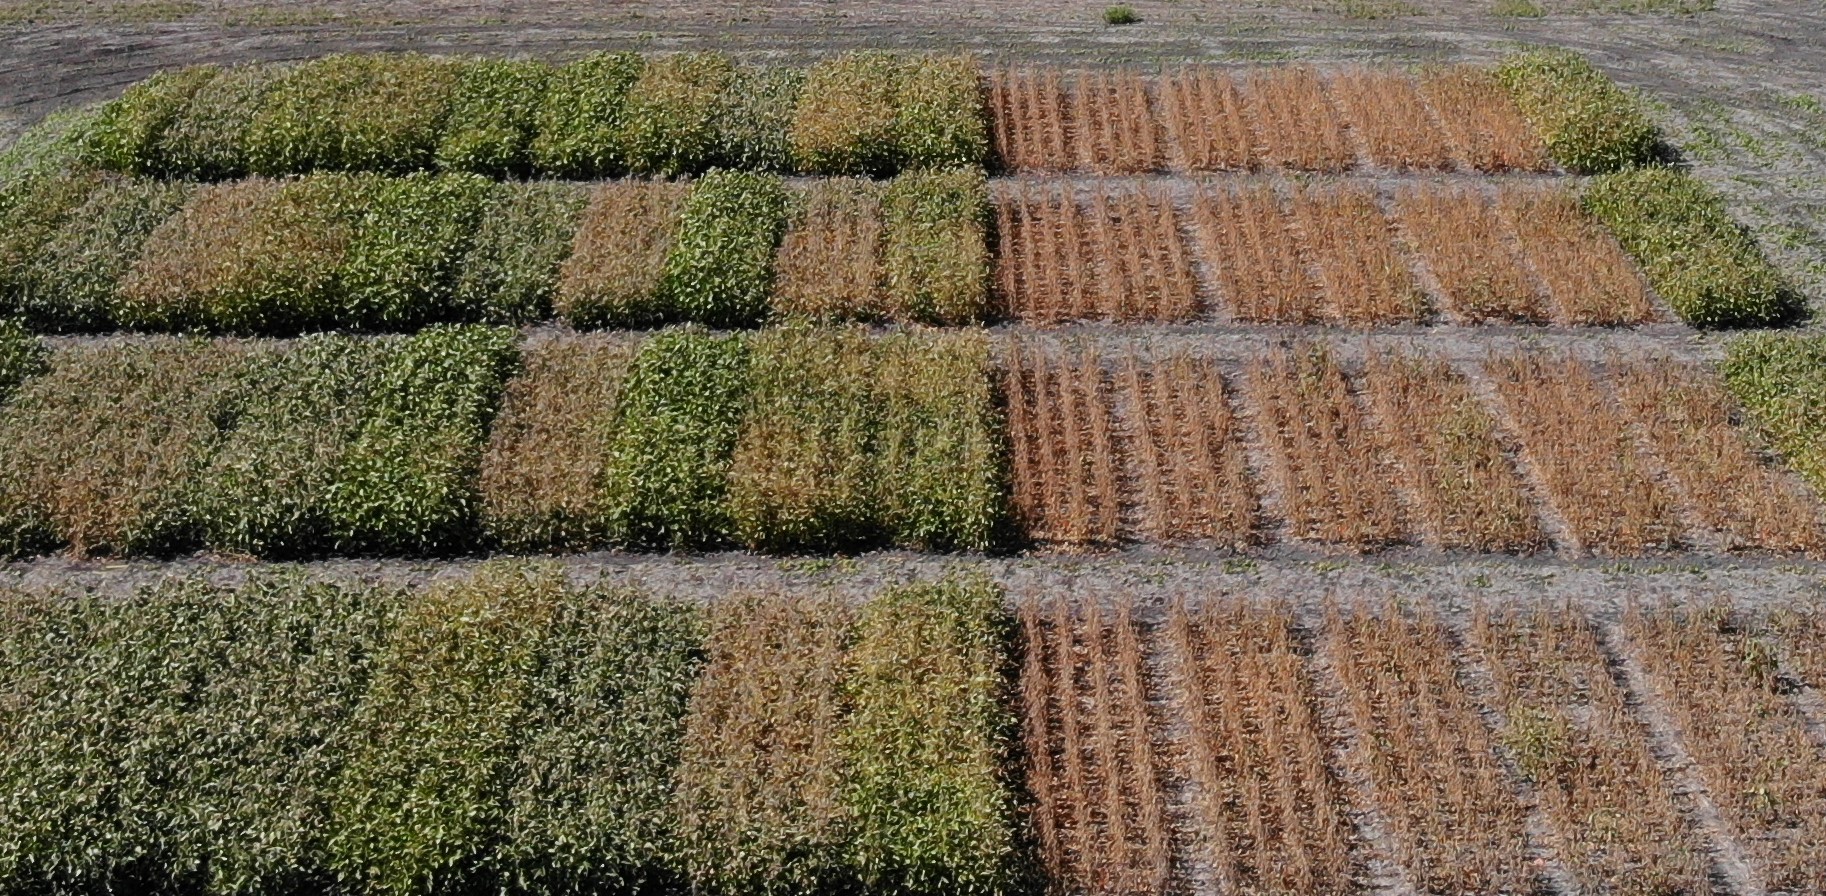 These plots are part of NDSU's soybean research. (NDSU photo)